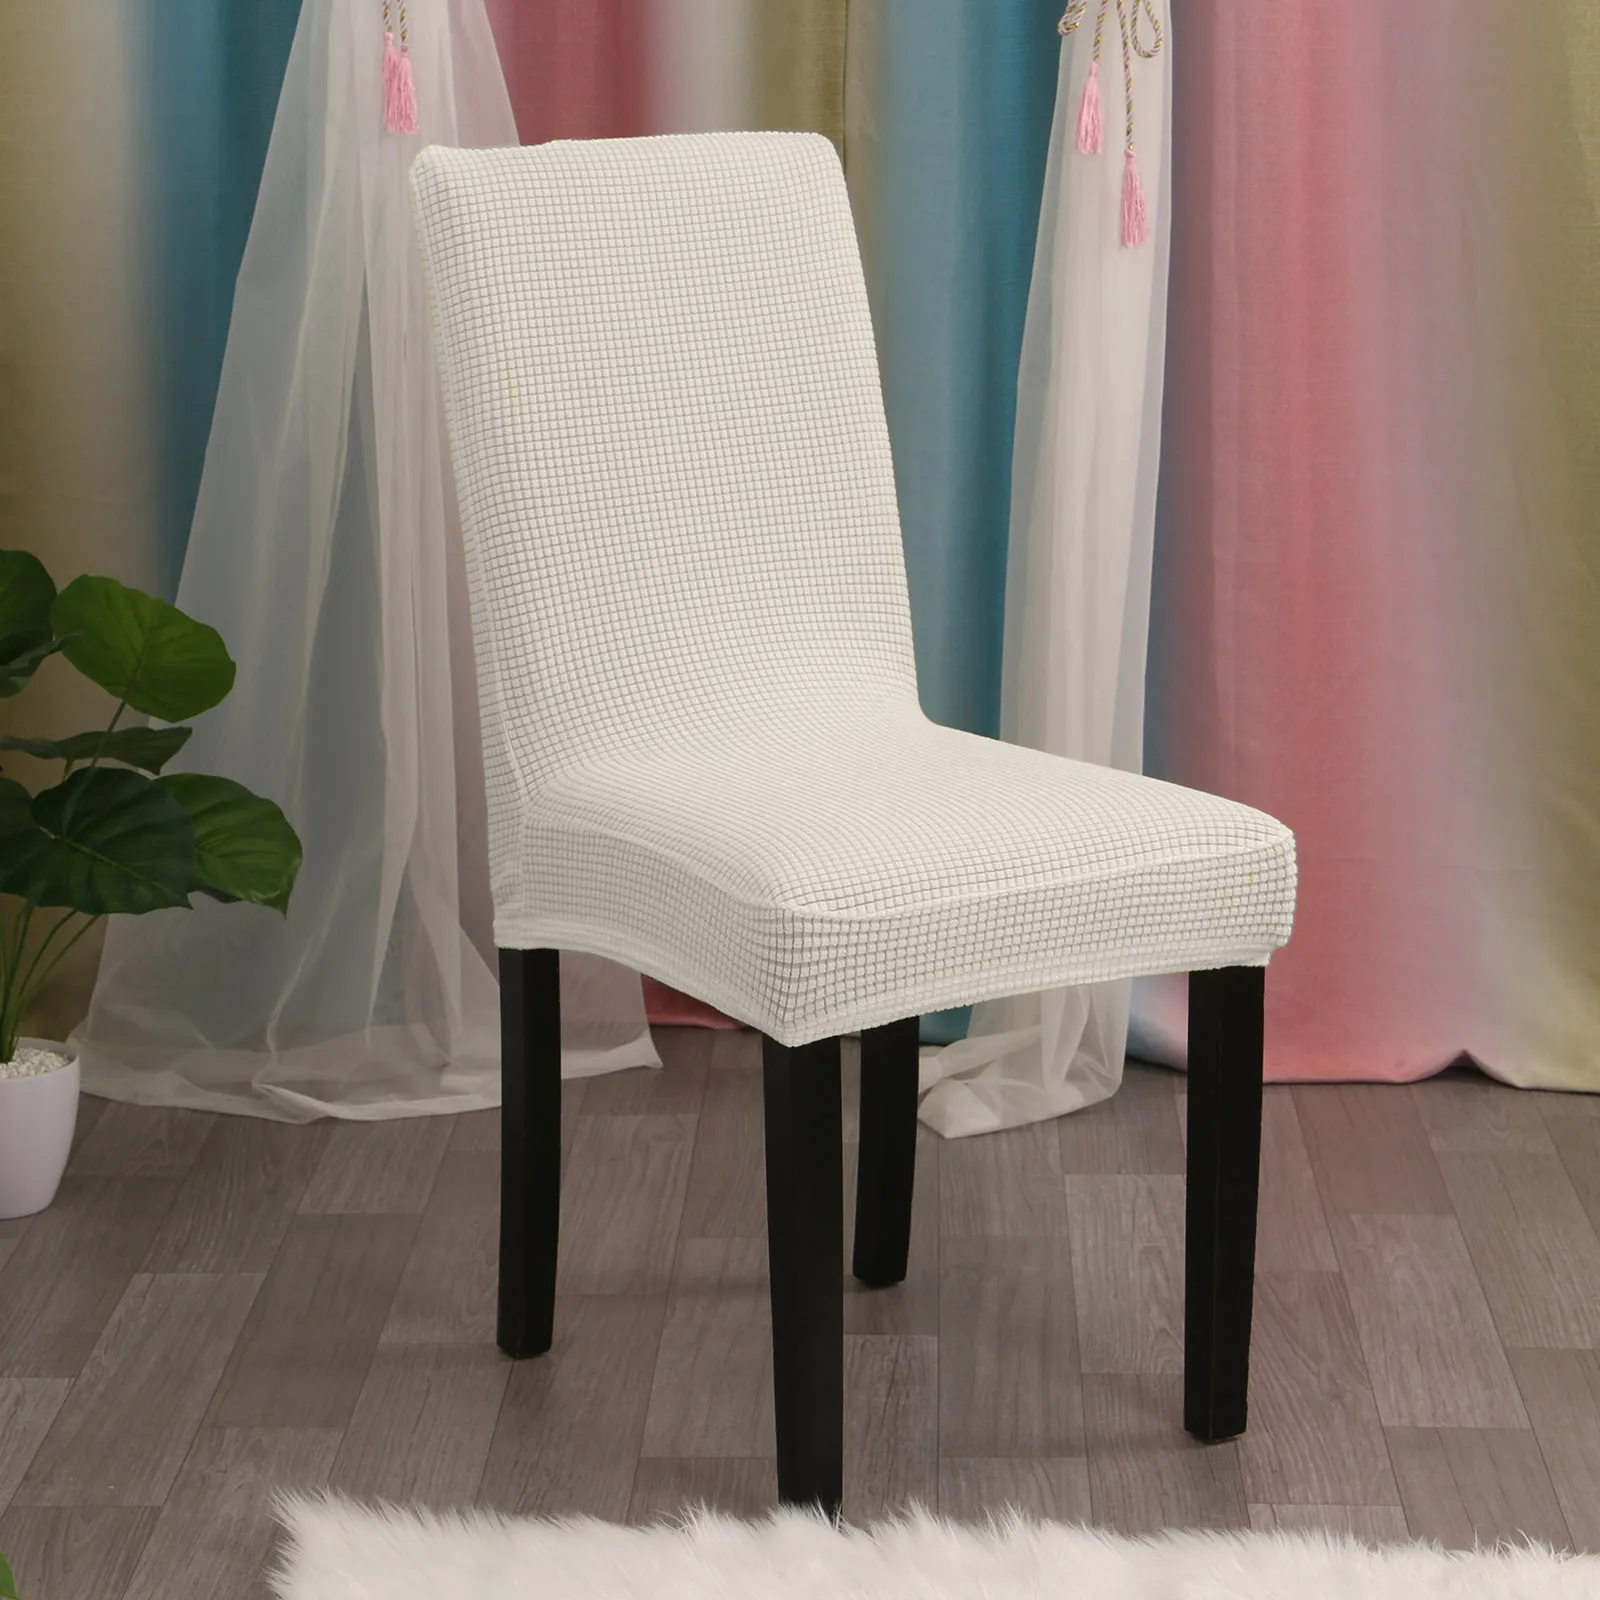 

Super Soft Polar Fleece Fabric Chair Cover Elastic Chair Covers Spandex for Dining Room/wedding/Kitchen/Hotel Party Banquet